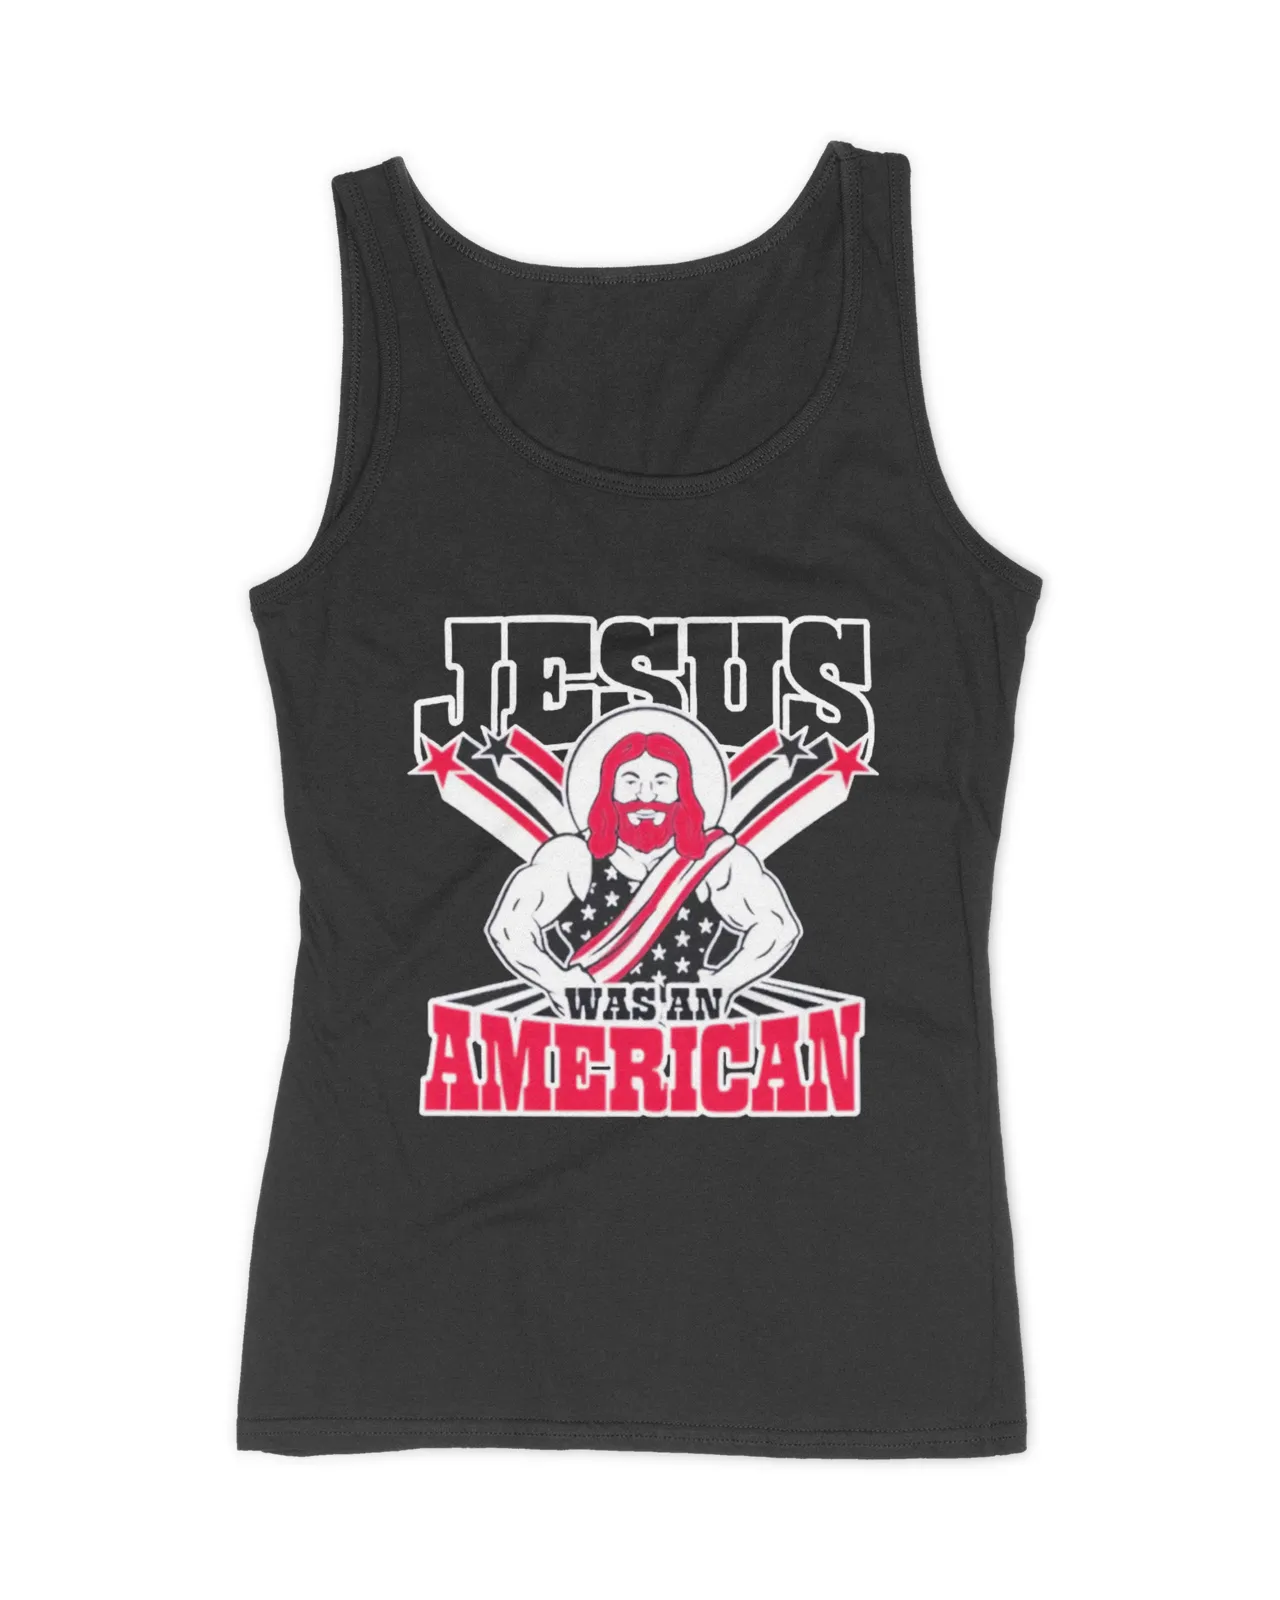 Jesus was an American T-shirt